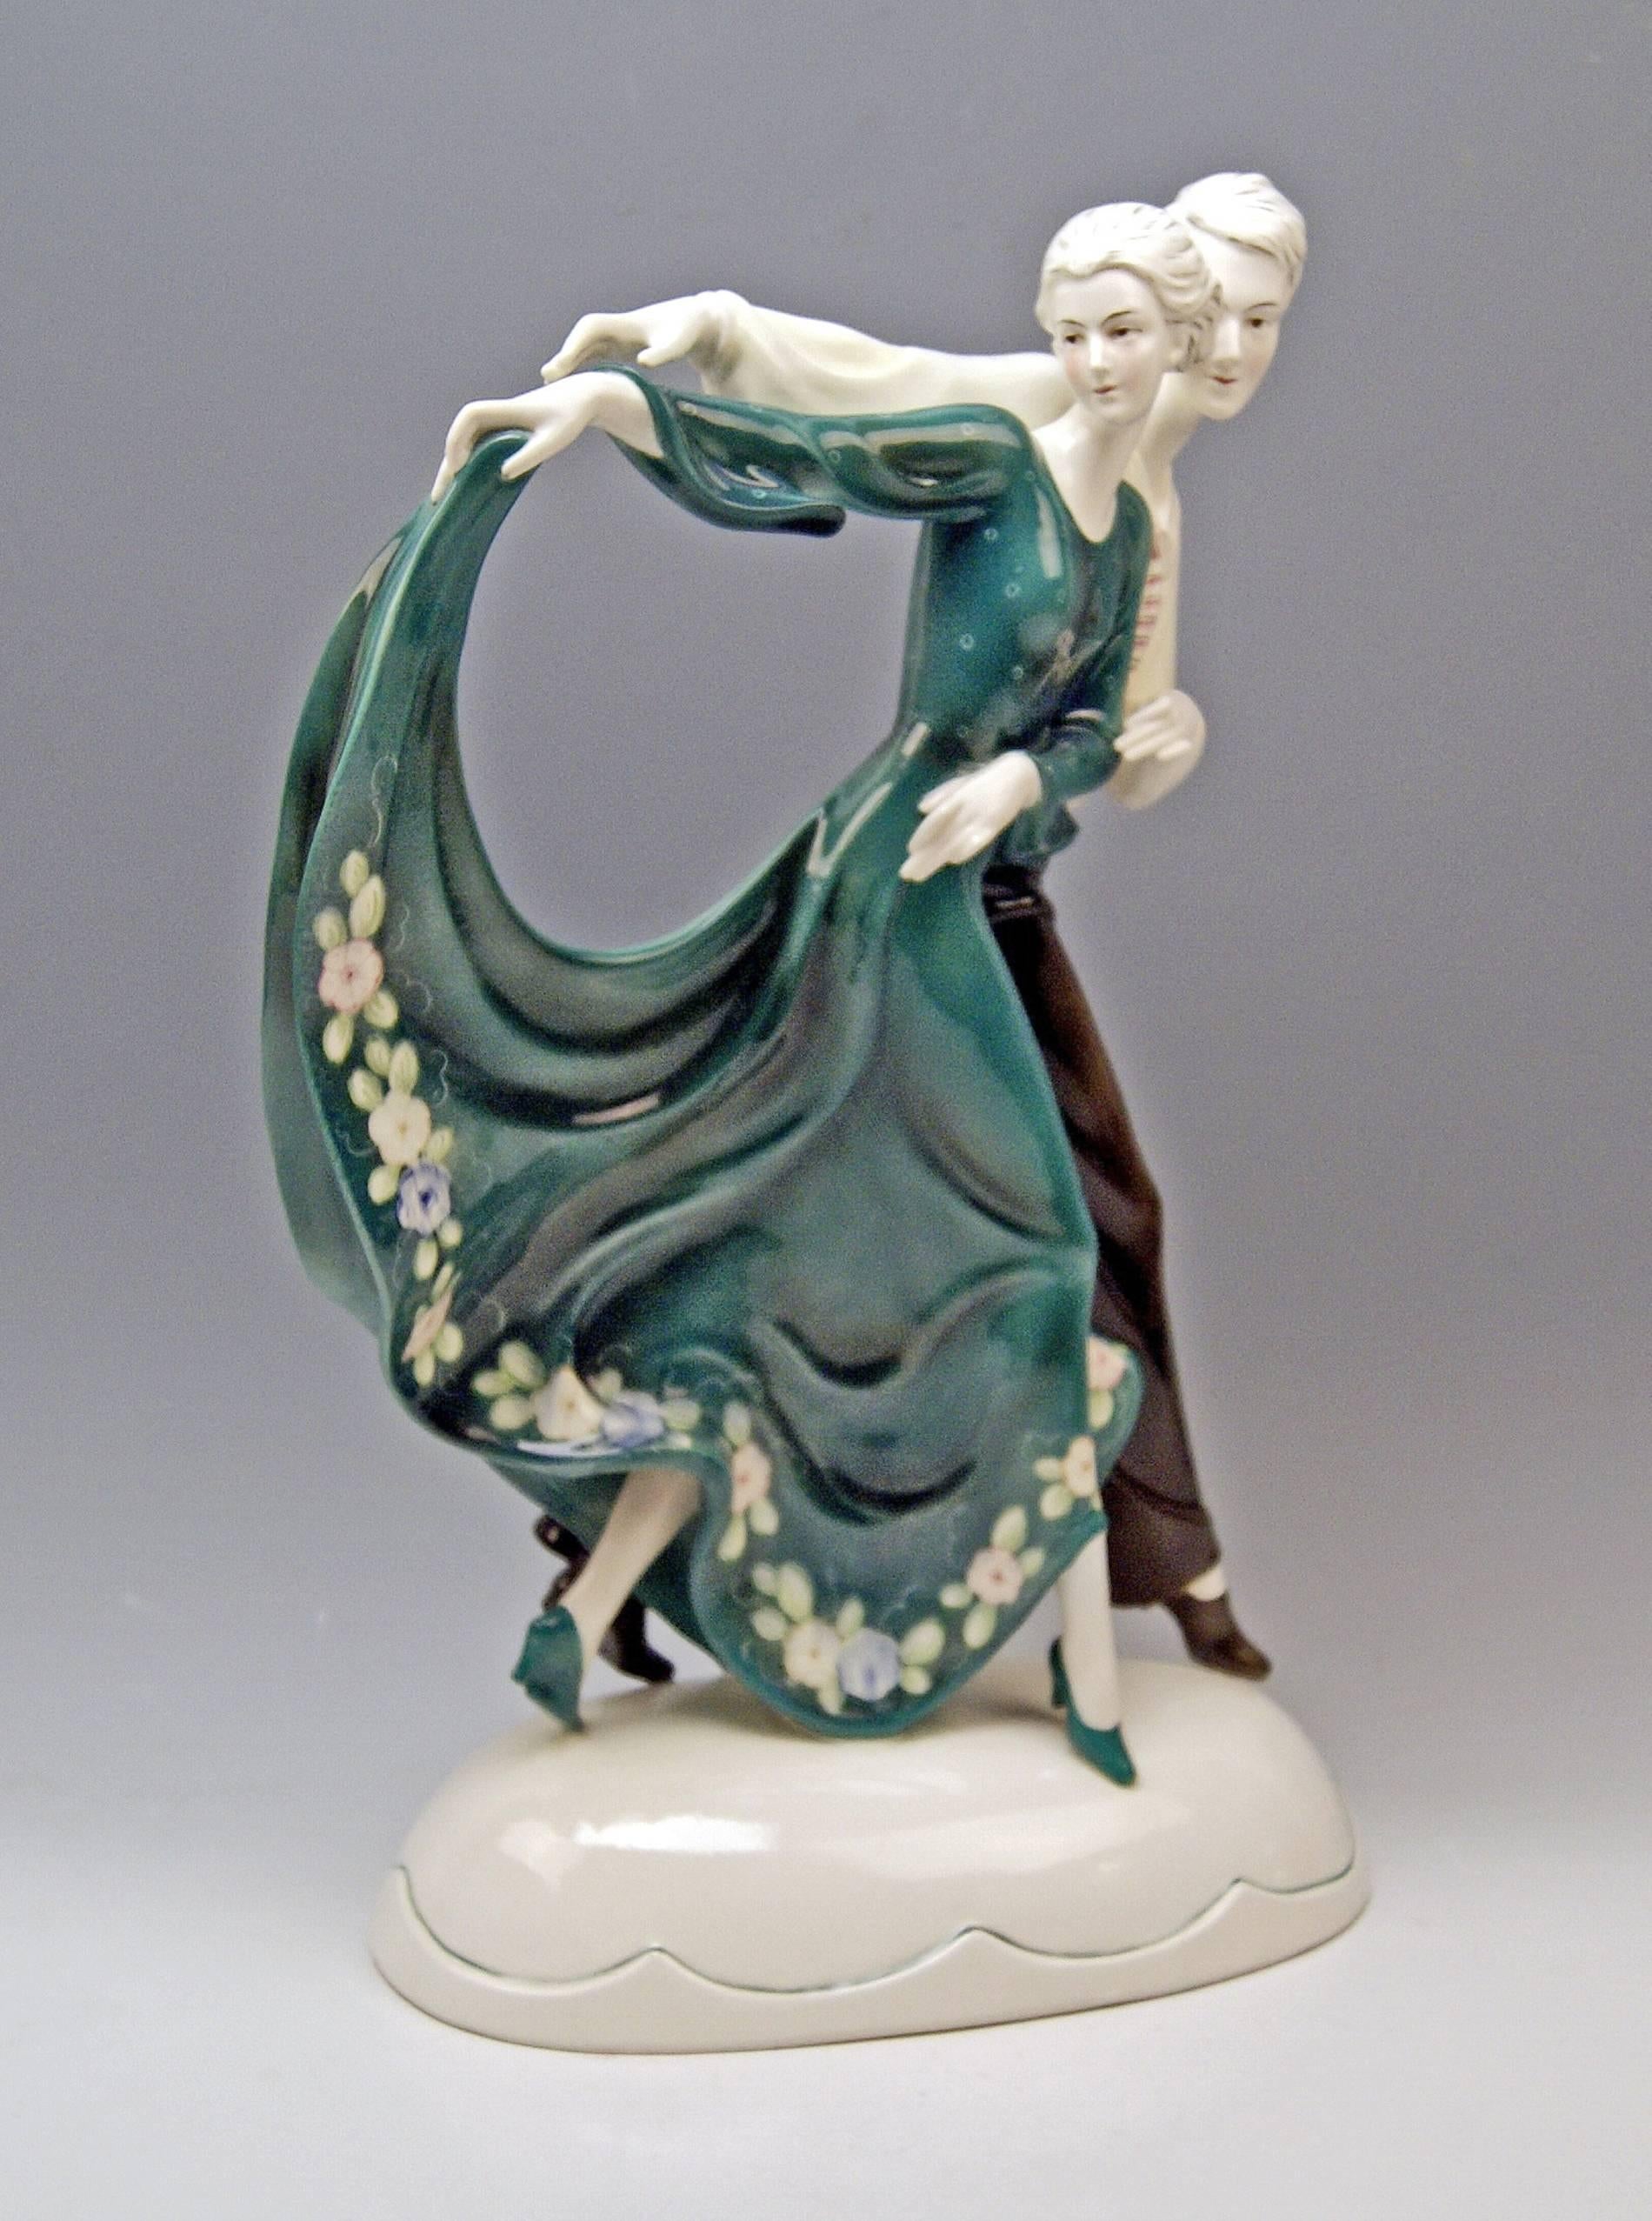 Stunning Art Deco tall dancing couple, manufactured in goldscheider style.

Model created before 1930 or made circa 1930. 
Katzhu(e)tte (= Cat's House / in German: Katzhütte) / Hertwig & Co. porcelain manufactory.

Hallmarked:
Katzhutte green